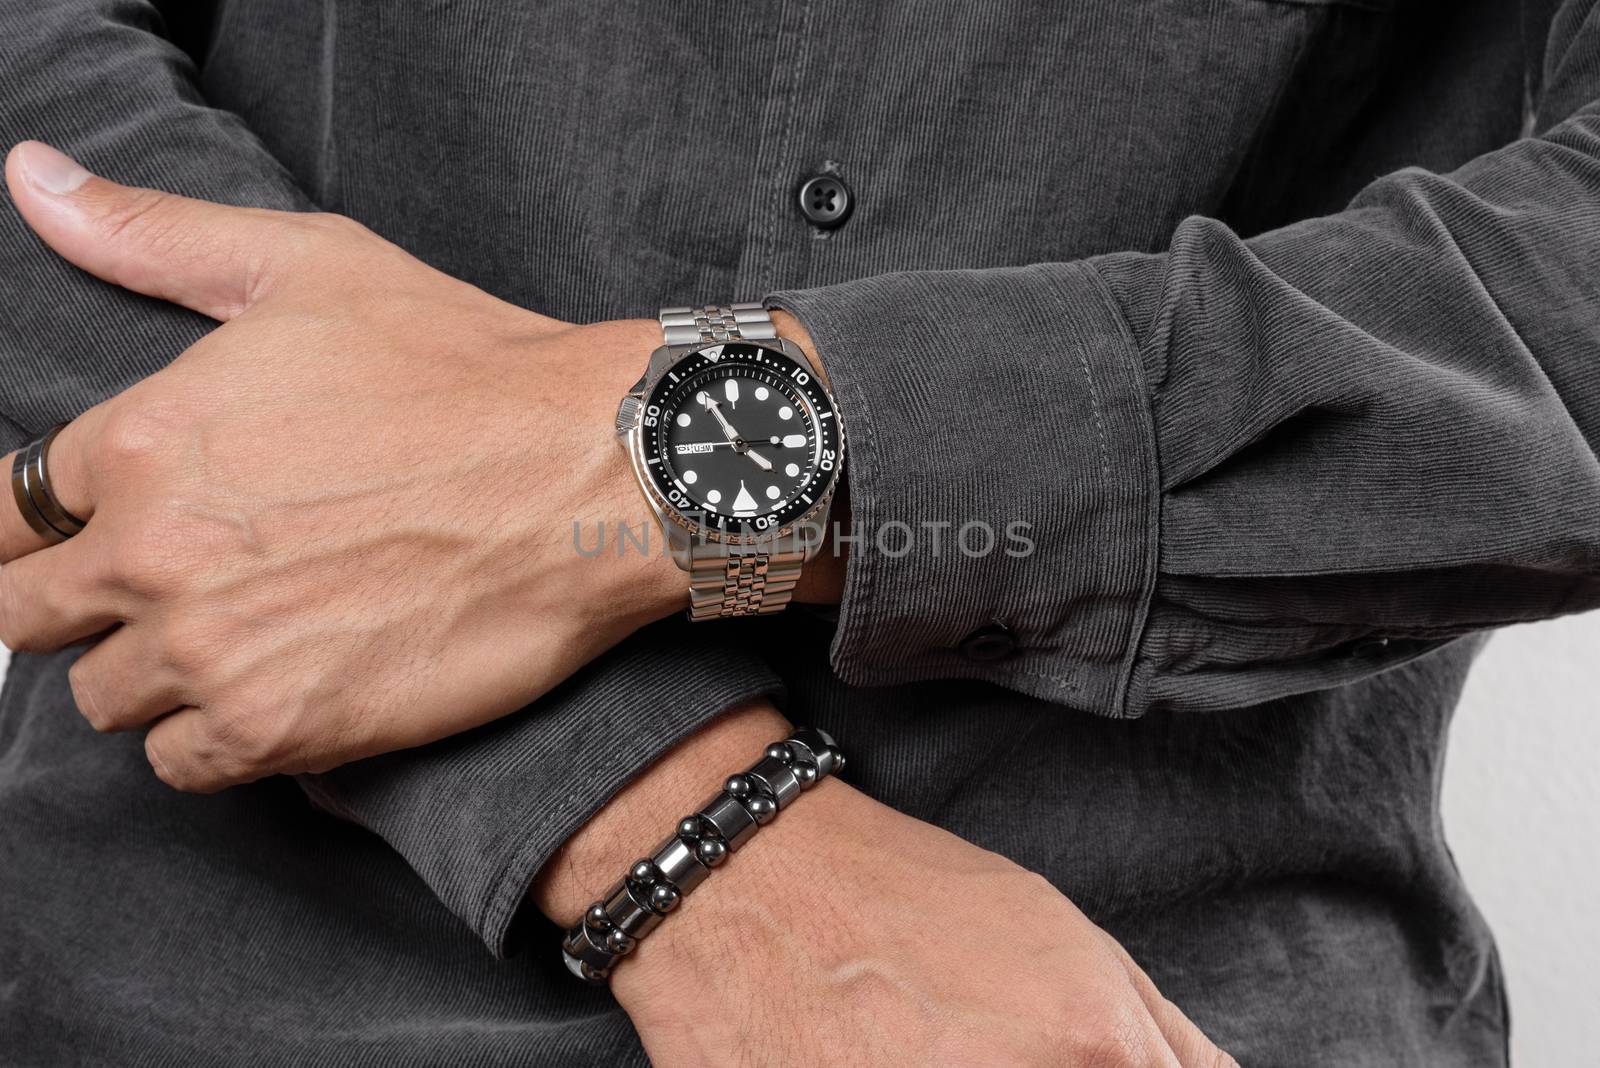 The man posing with dive watch with stainless steel bracelet.